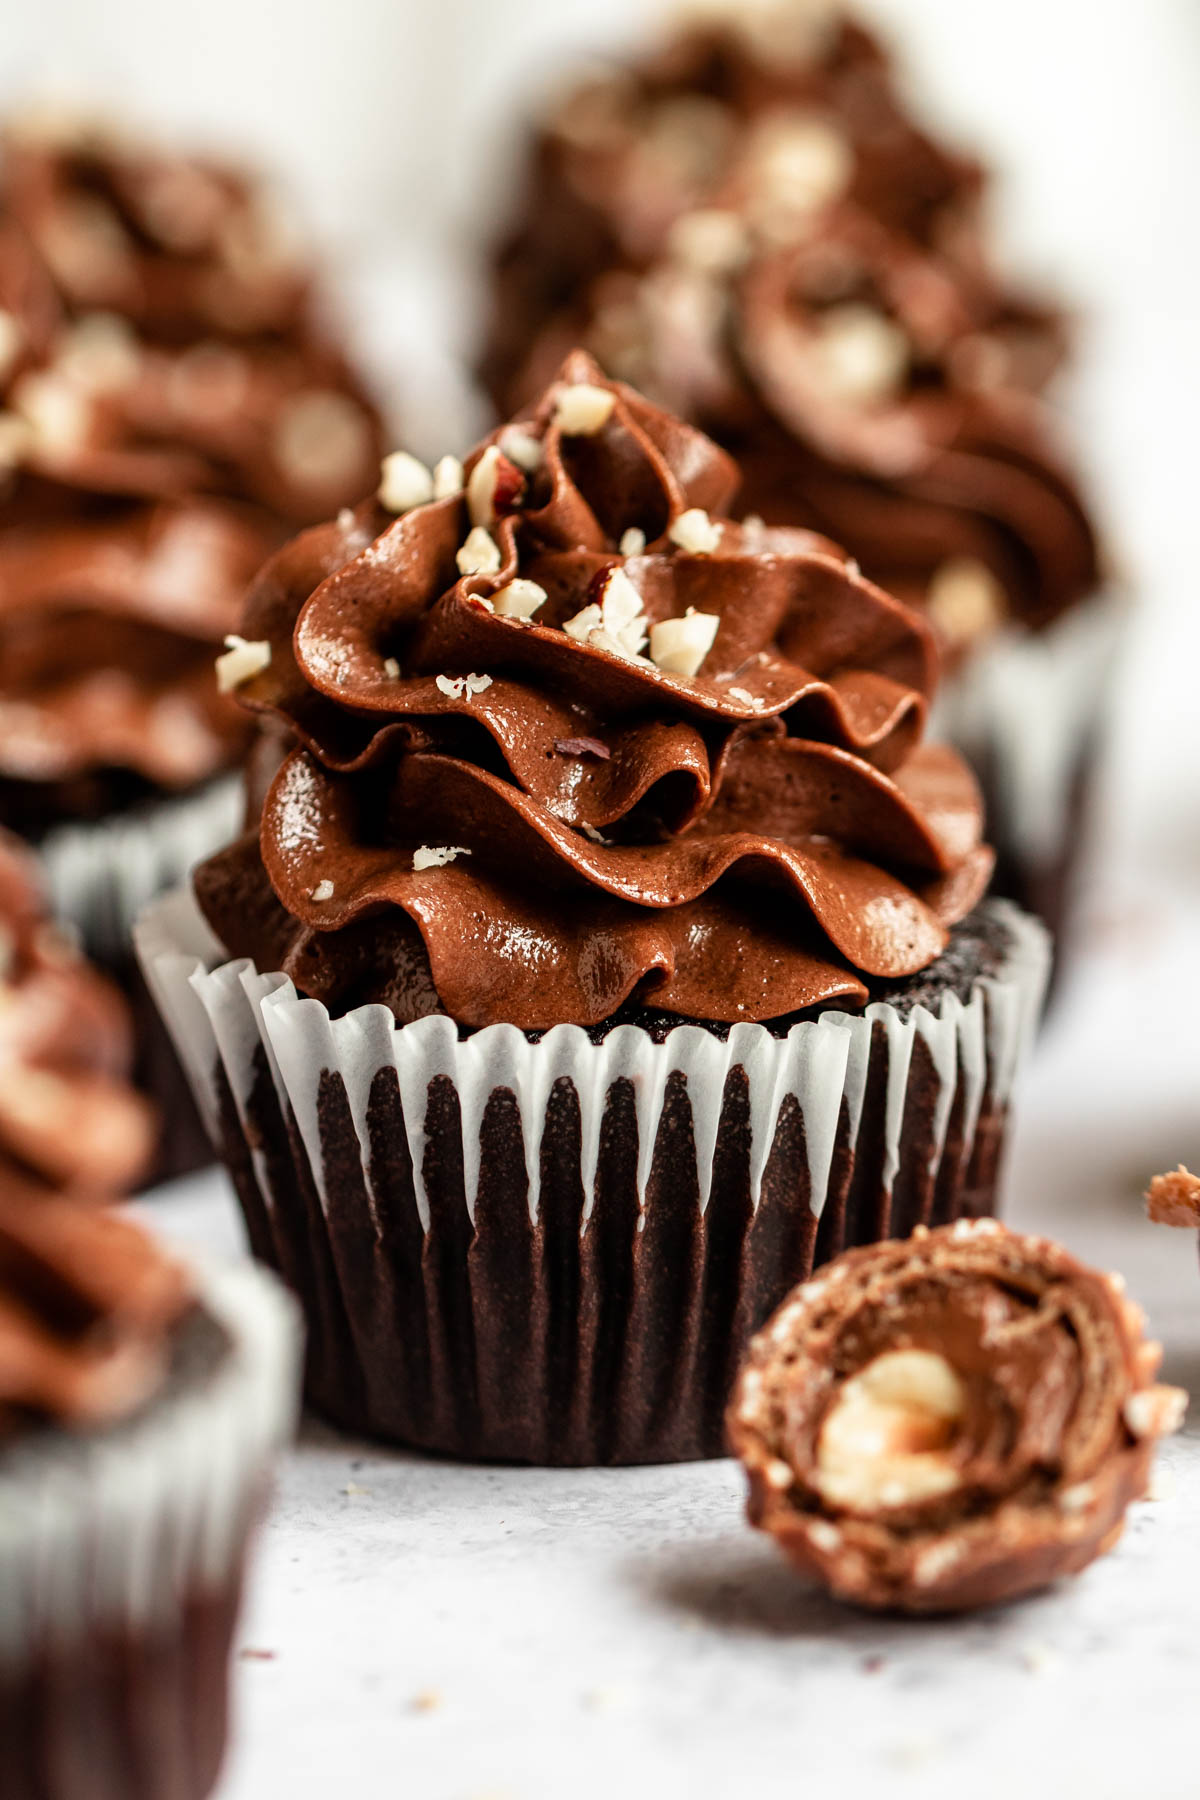 Nutella cupcakes with nutella frosting.